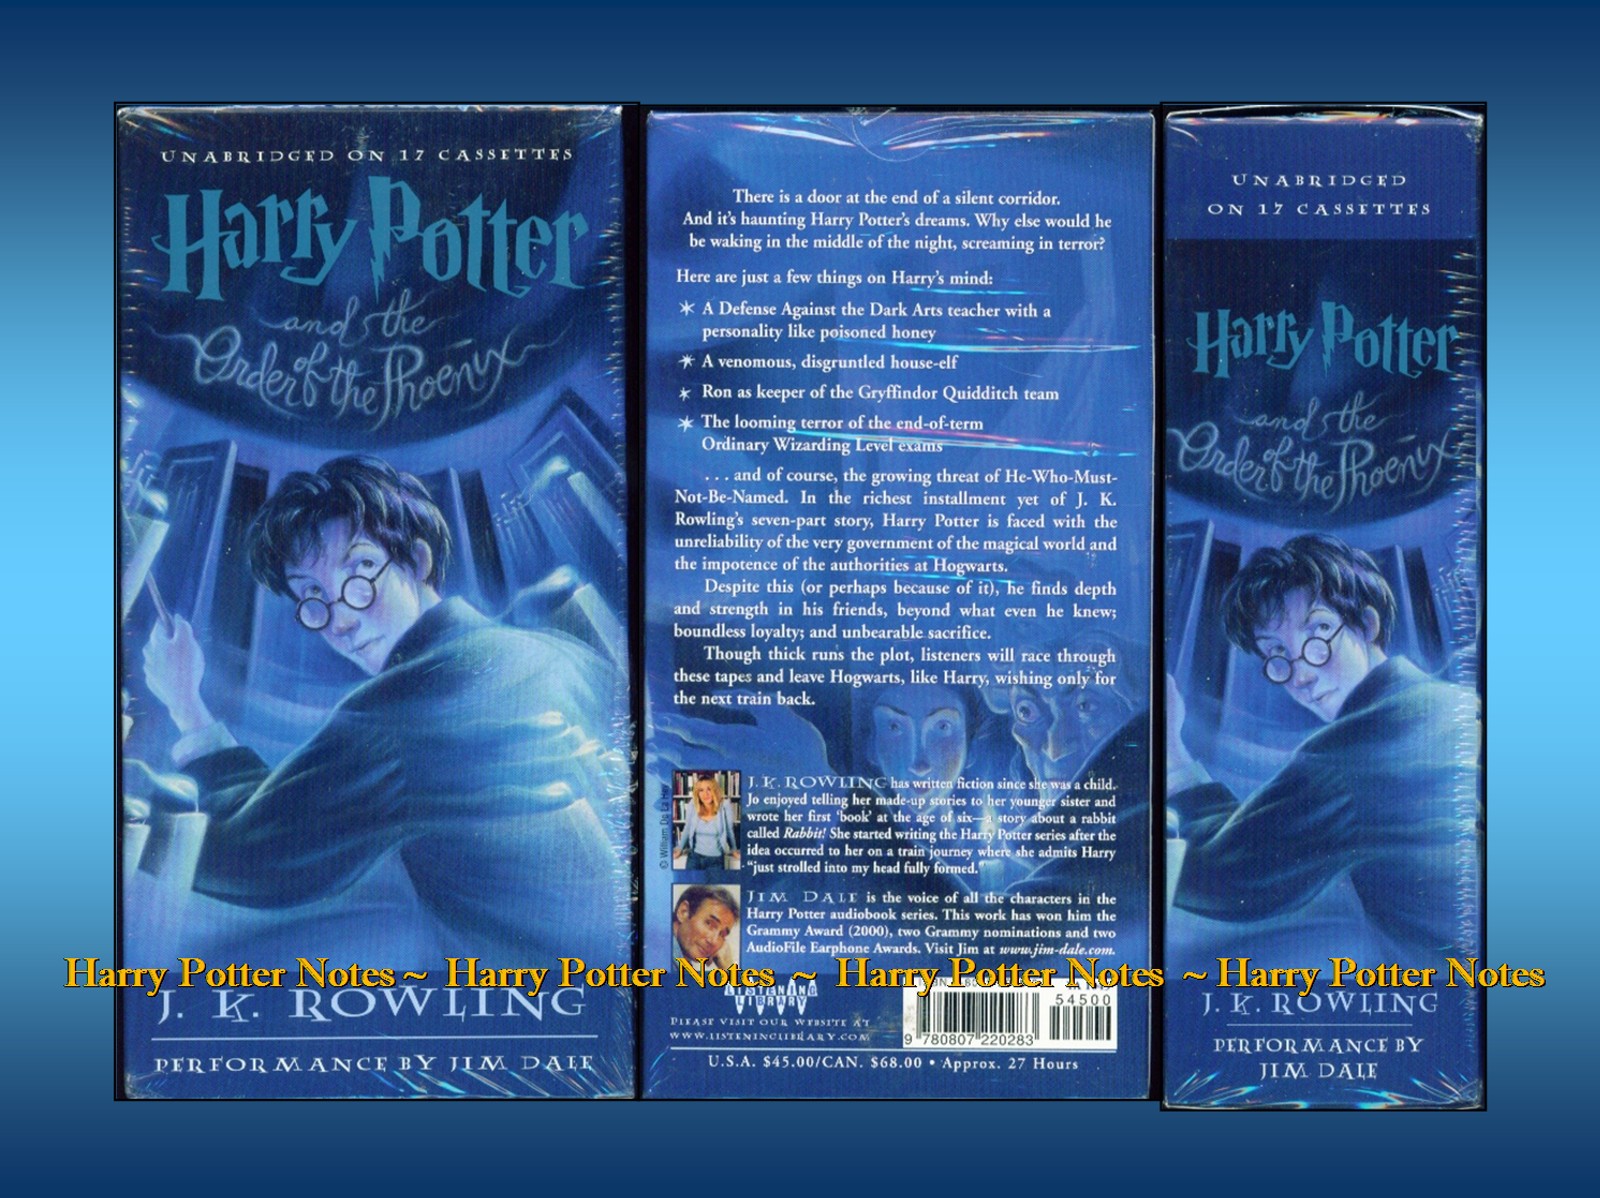 Harry Potter And The Deathly Hallows Audiobook Free Stream Stephen Fry